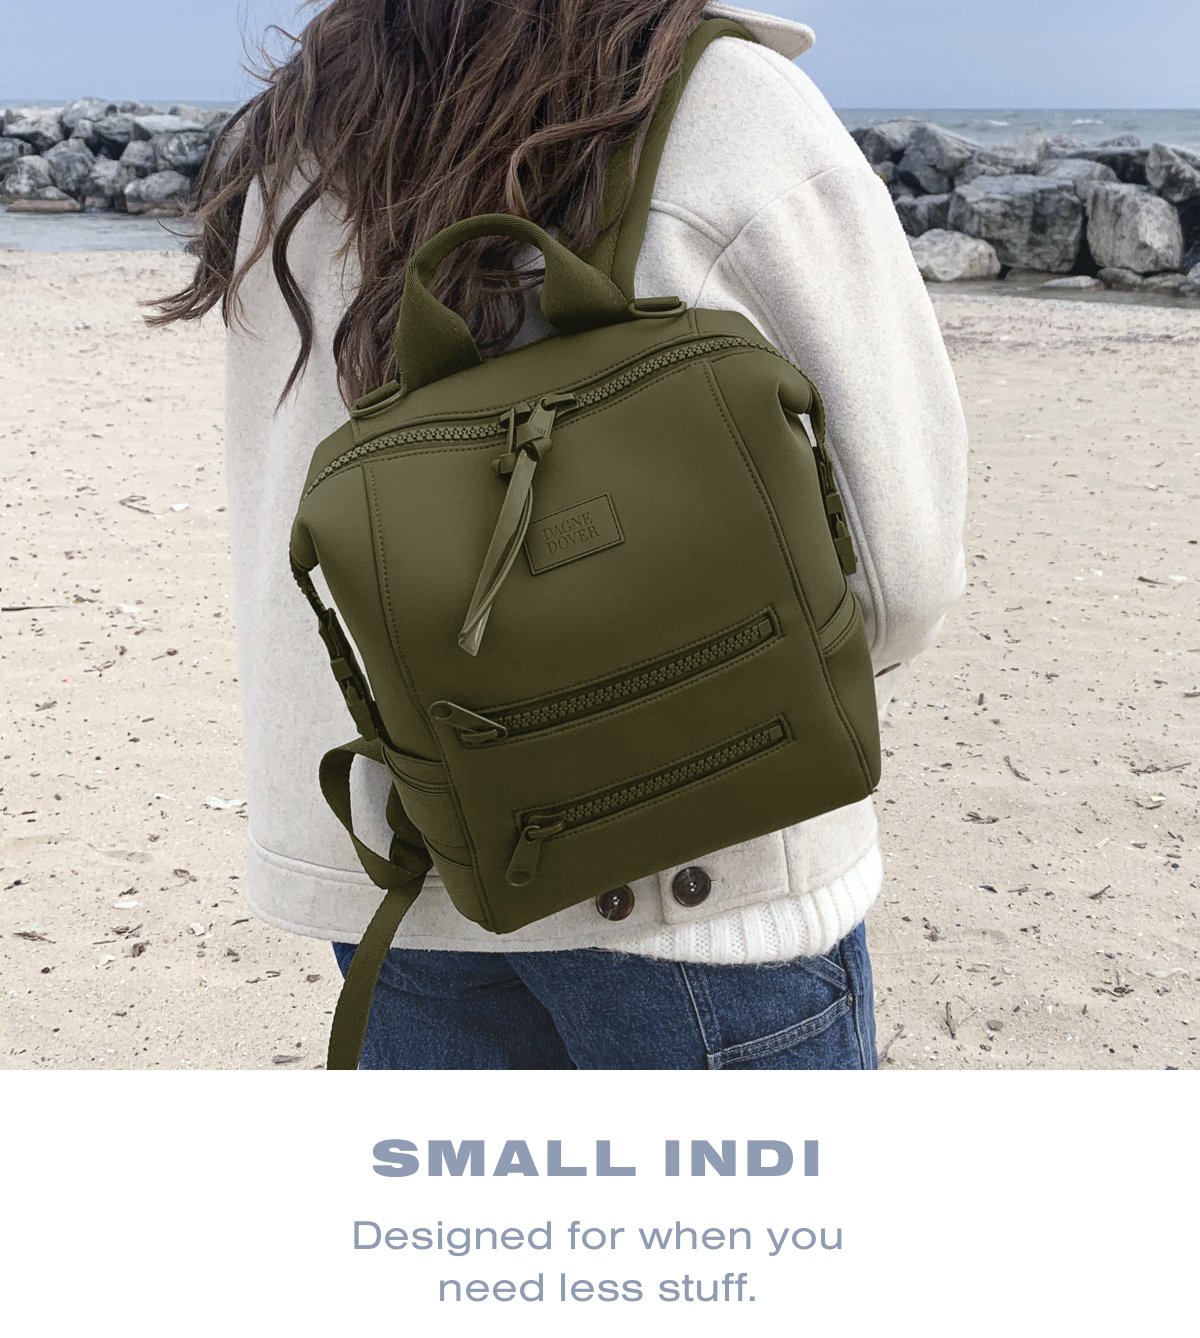 Dagne Dover SMALL Indi Backpack Unboxing, Packing, & Review! 